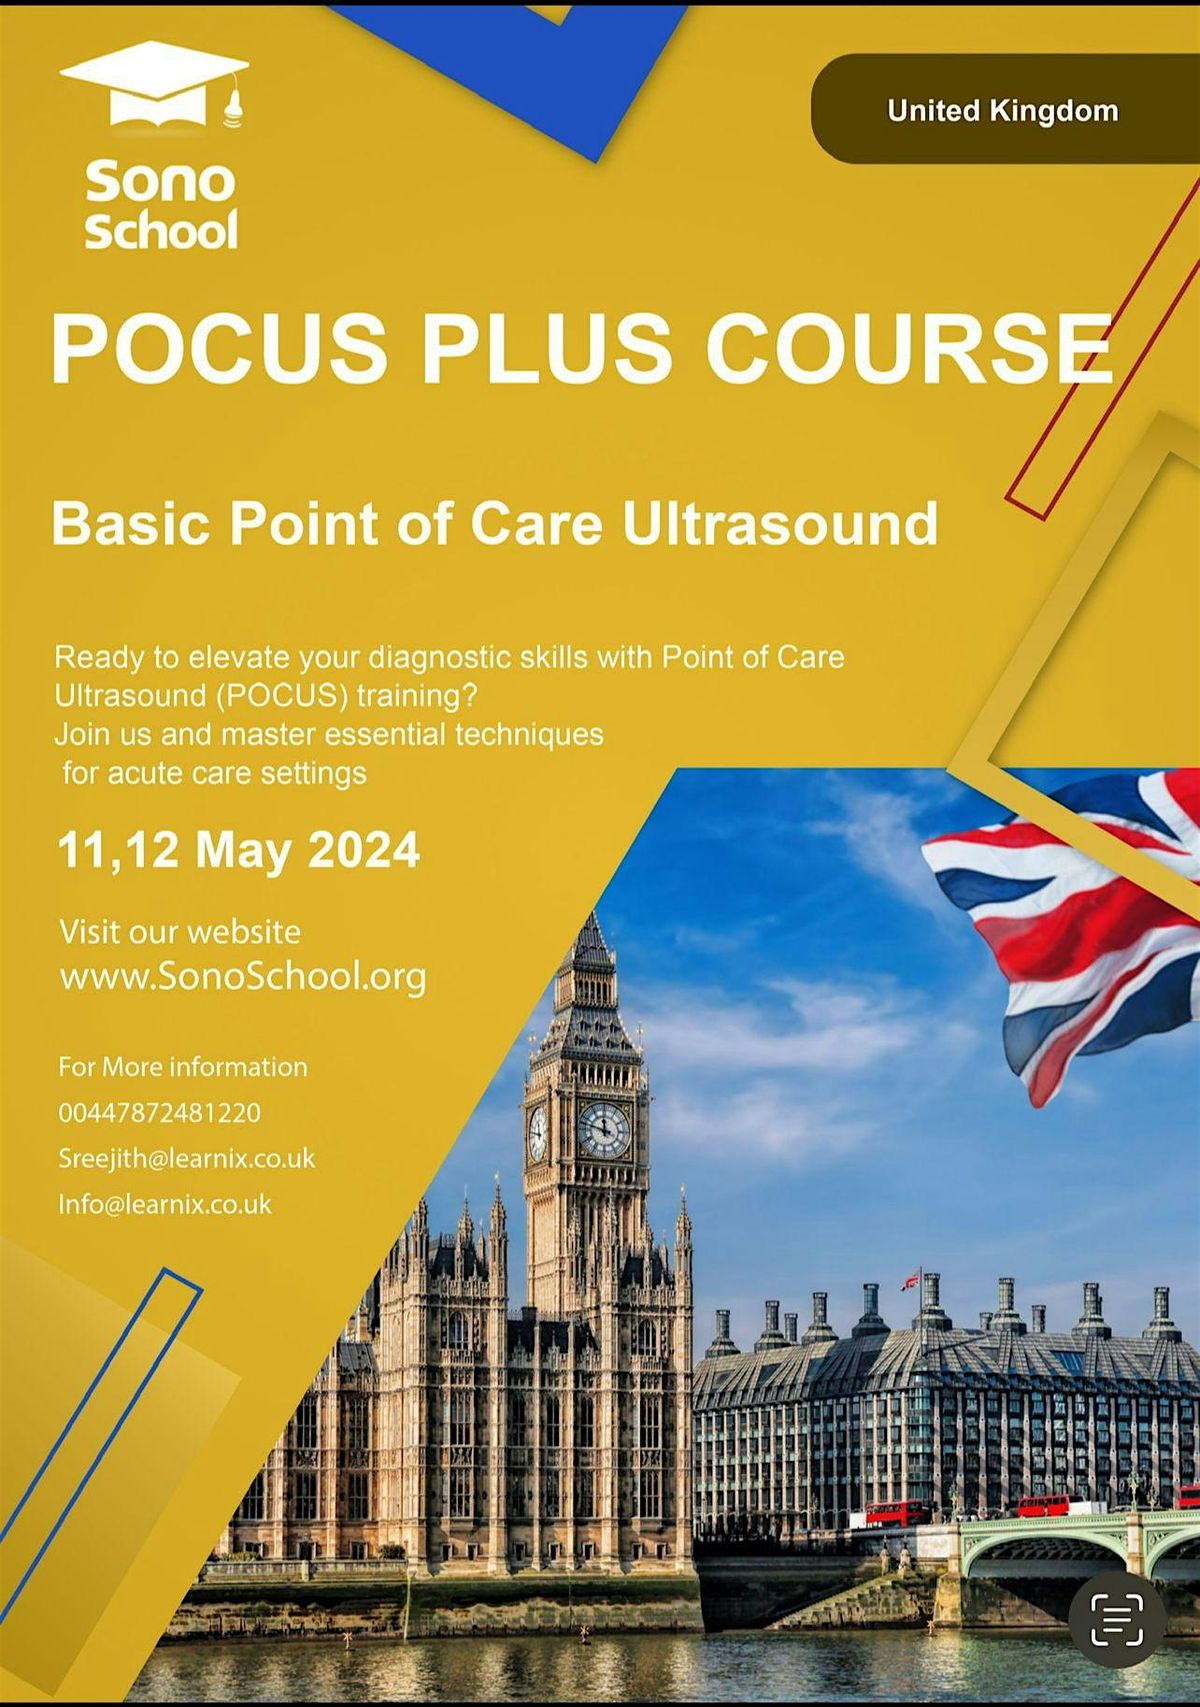 POCUS PLUS COURSE -Point of Care Ultrasound